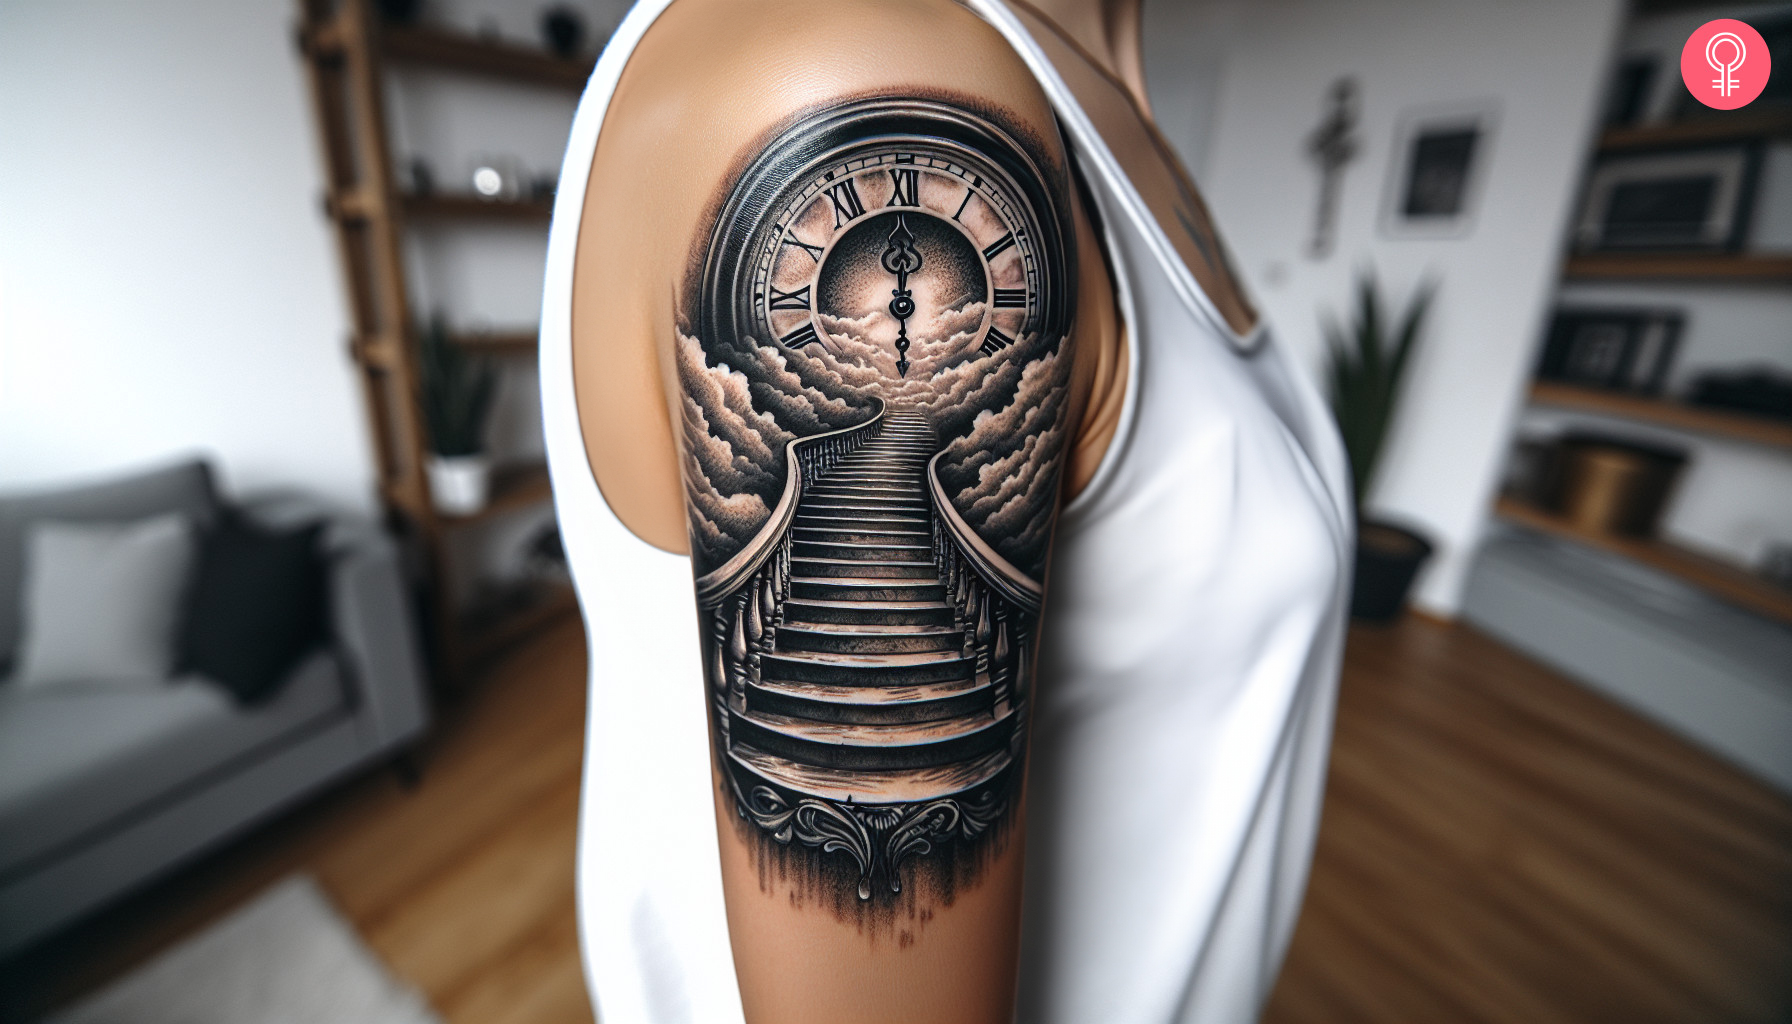  A ‘Stairway To Heaven’ tattoo with a clock on the upper arm